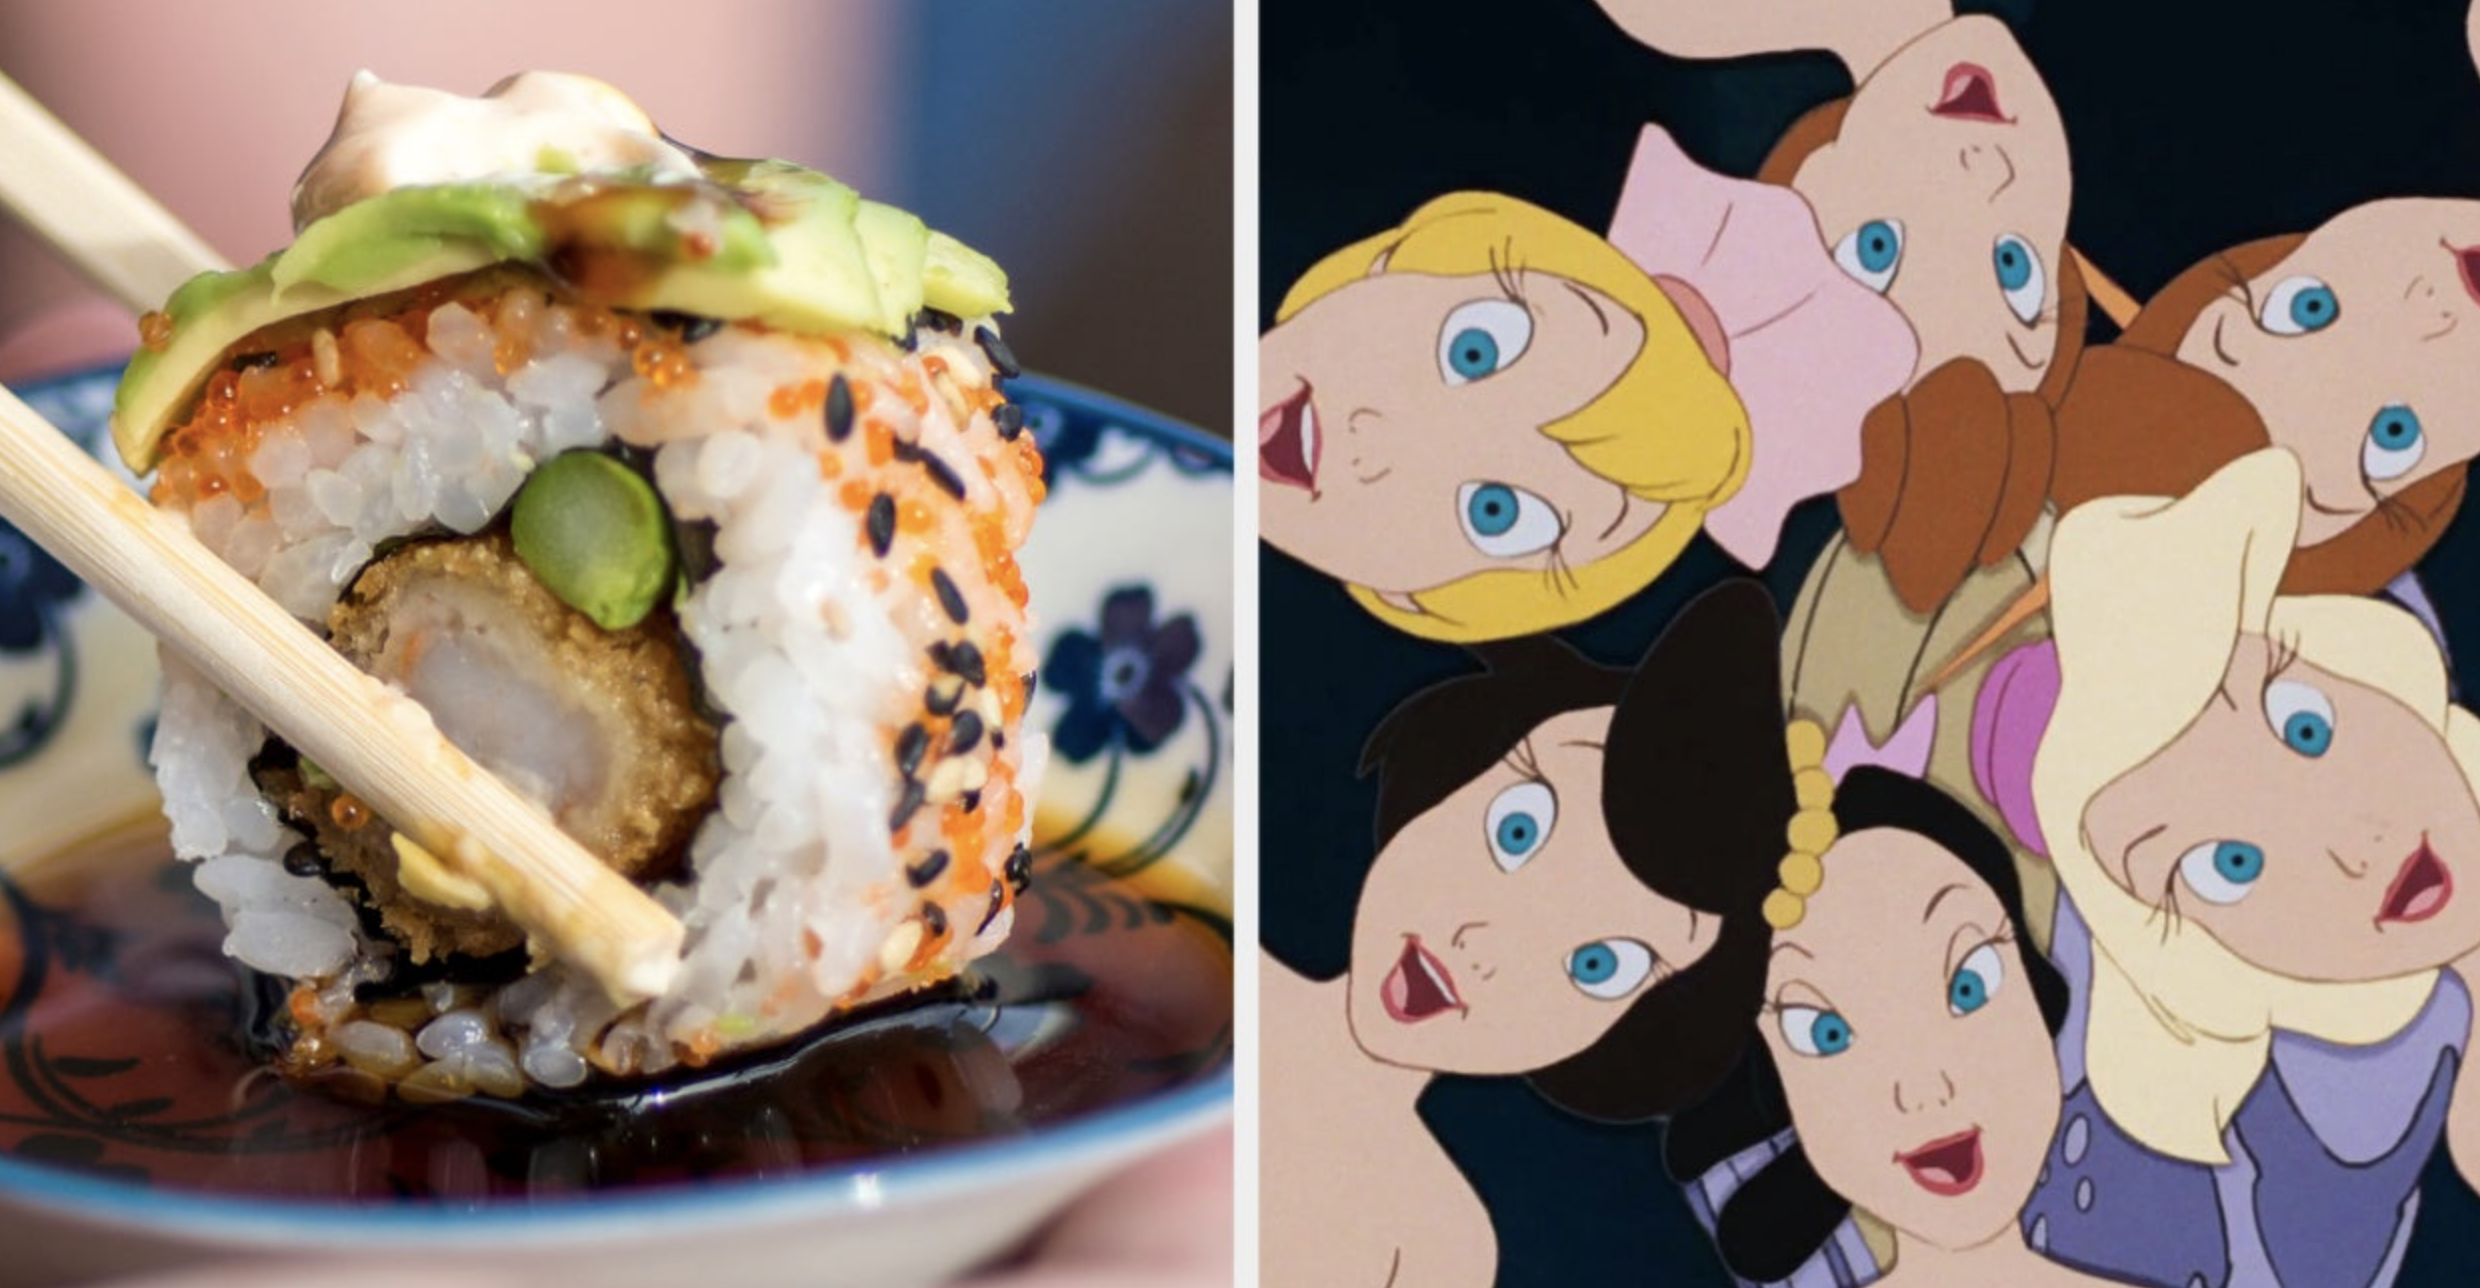 two images: on the left is a piece of sushi, on the right is an image of the animated versions of the little mermaid&#x27;s sisters